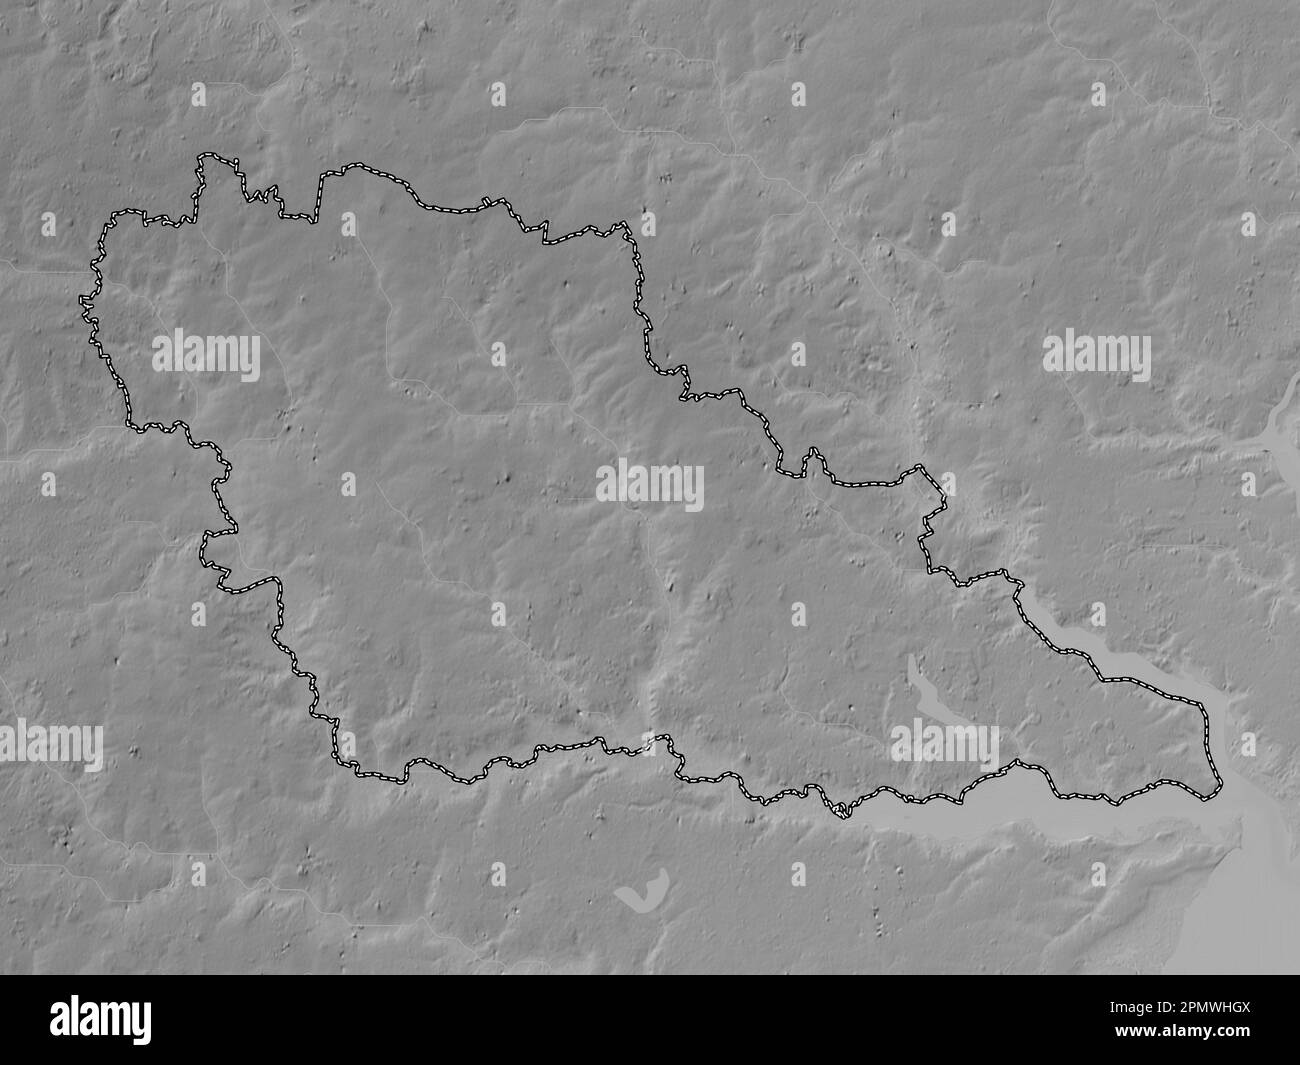 Babergh, non metropolitan district of England - Great Britain. Grayscale elevation map with lakes and rivers Stock Photo